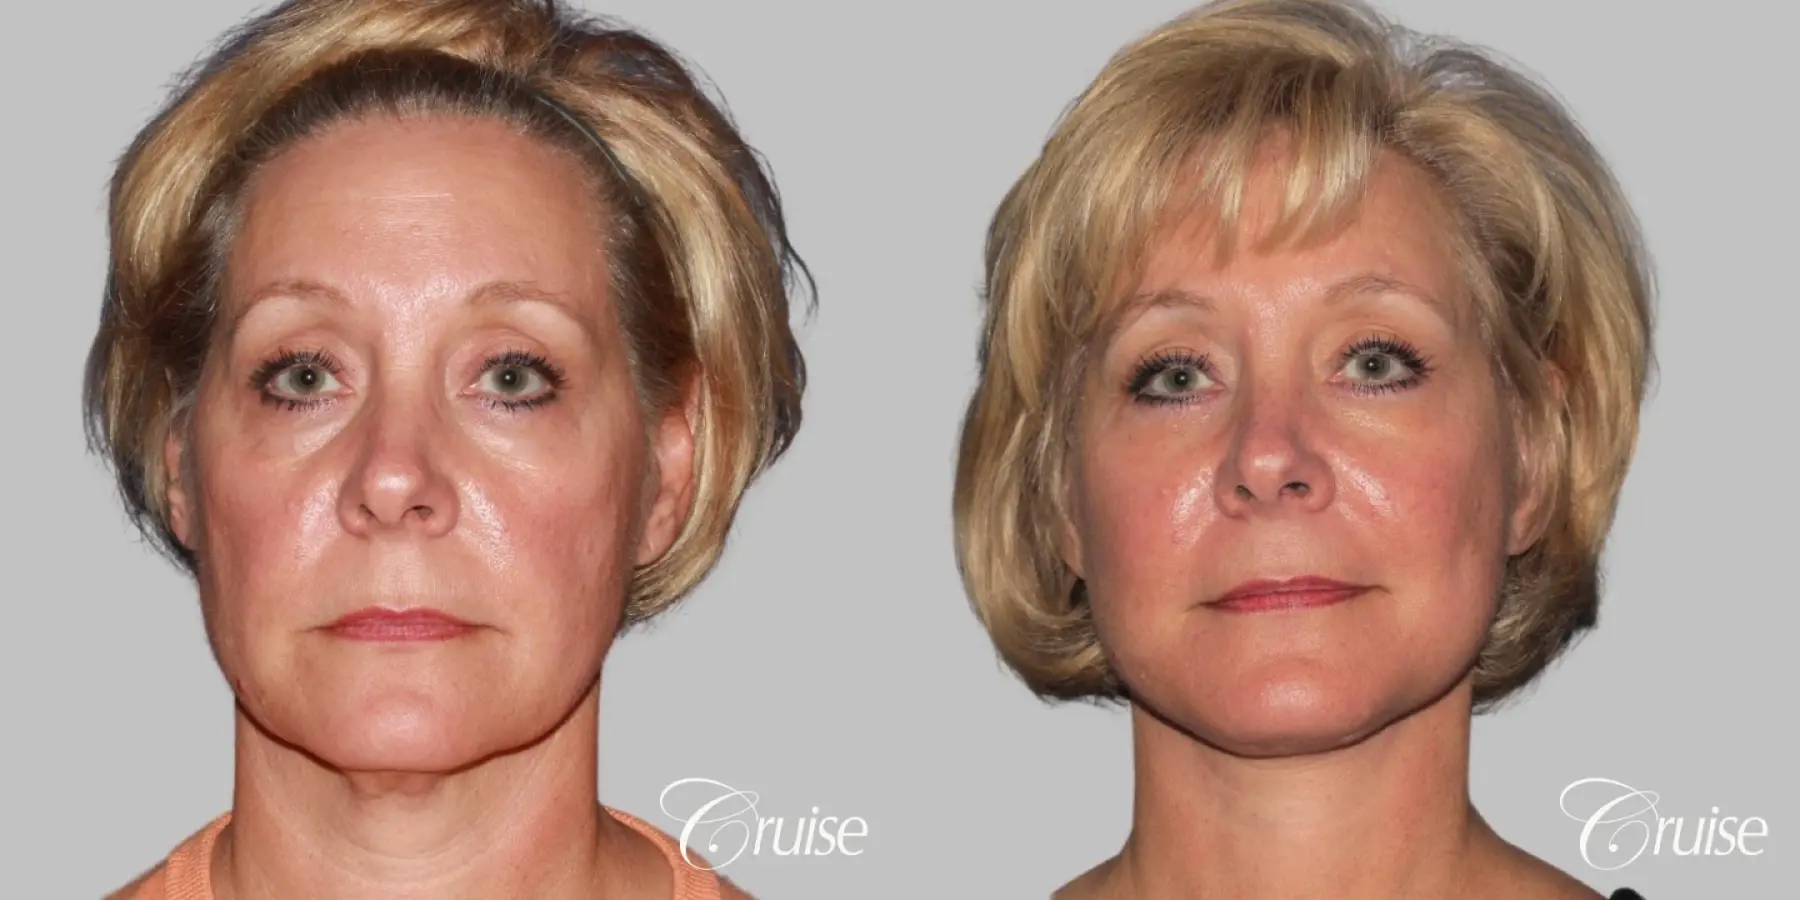 Female Facelift, Temple Lift, Fat Transfer, Neck Lift - Before and After  